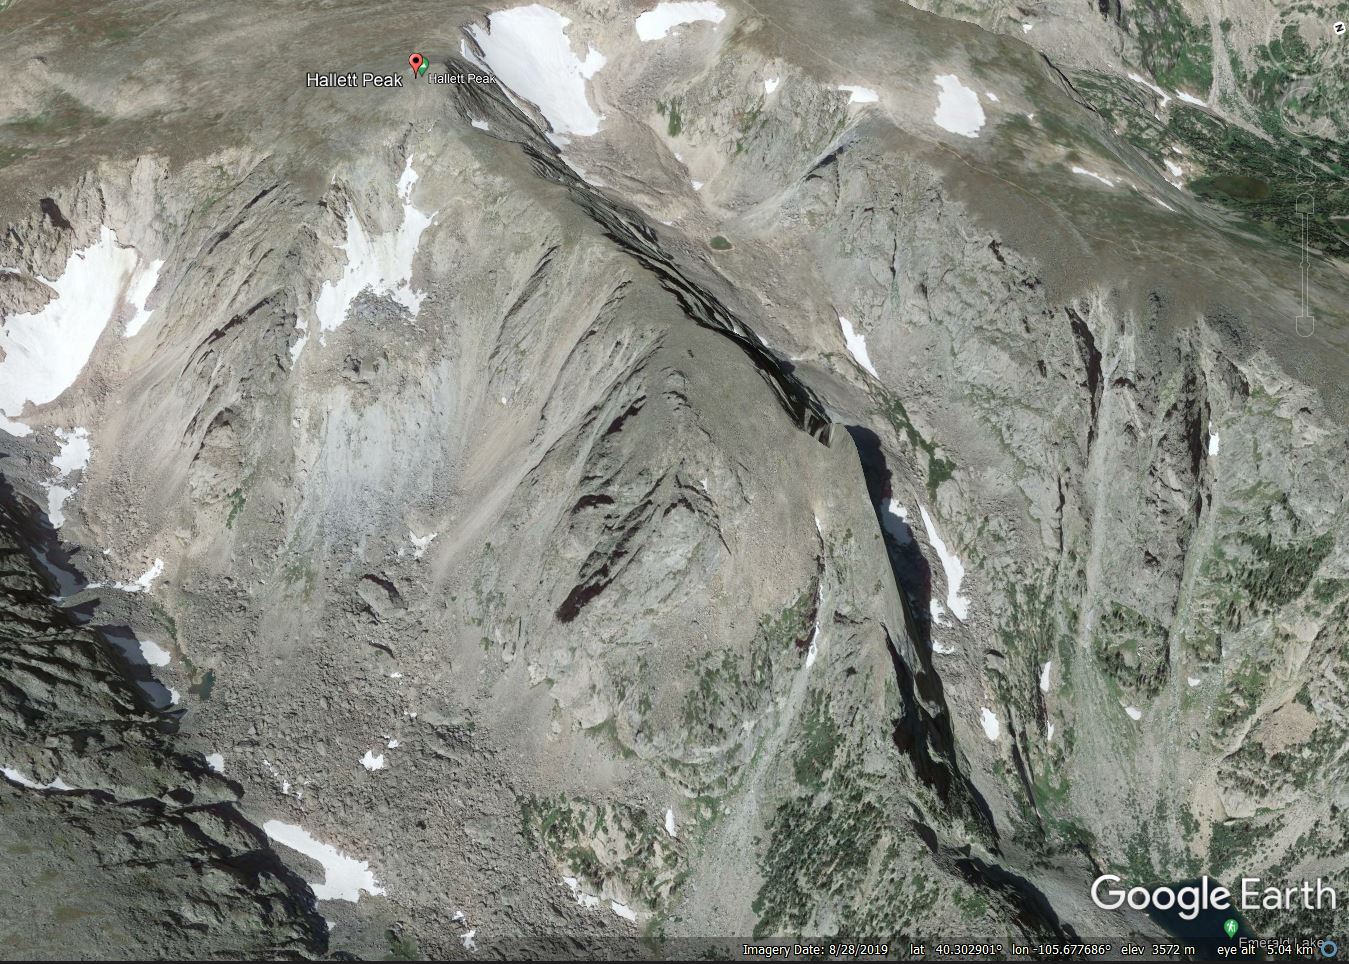 Google Earth image of the site of the 28 June 2022 rockslide on Hallett Peak in Colorado, USA